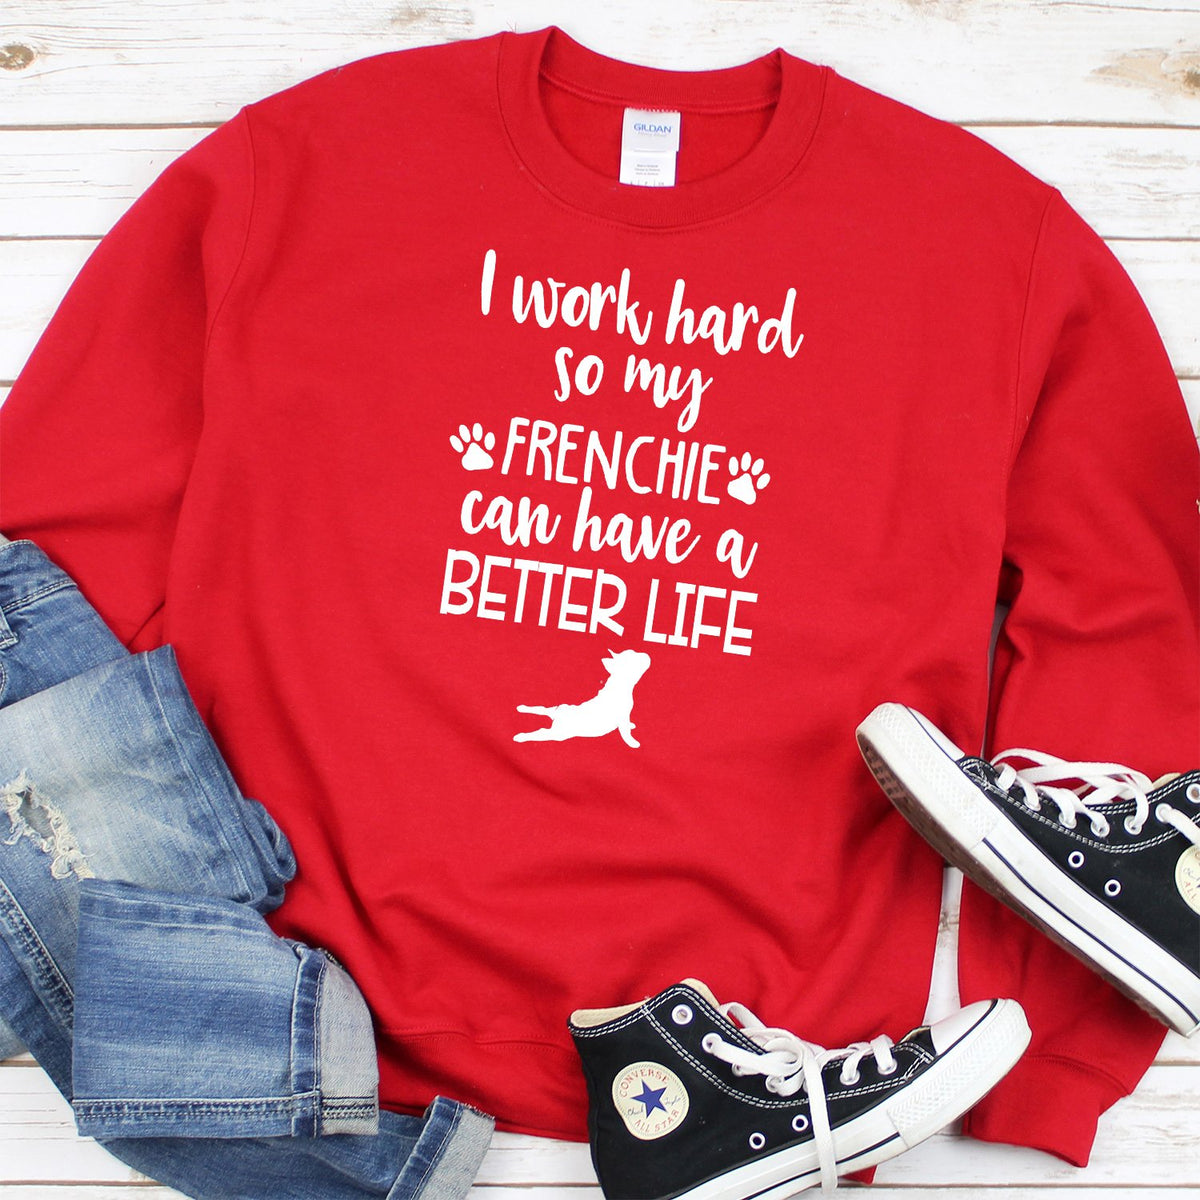 I Work Hard So My Frenchie Can Have A Better Life - Long Sleeve Heavy Crewneck Sweatshirt